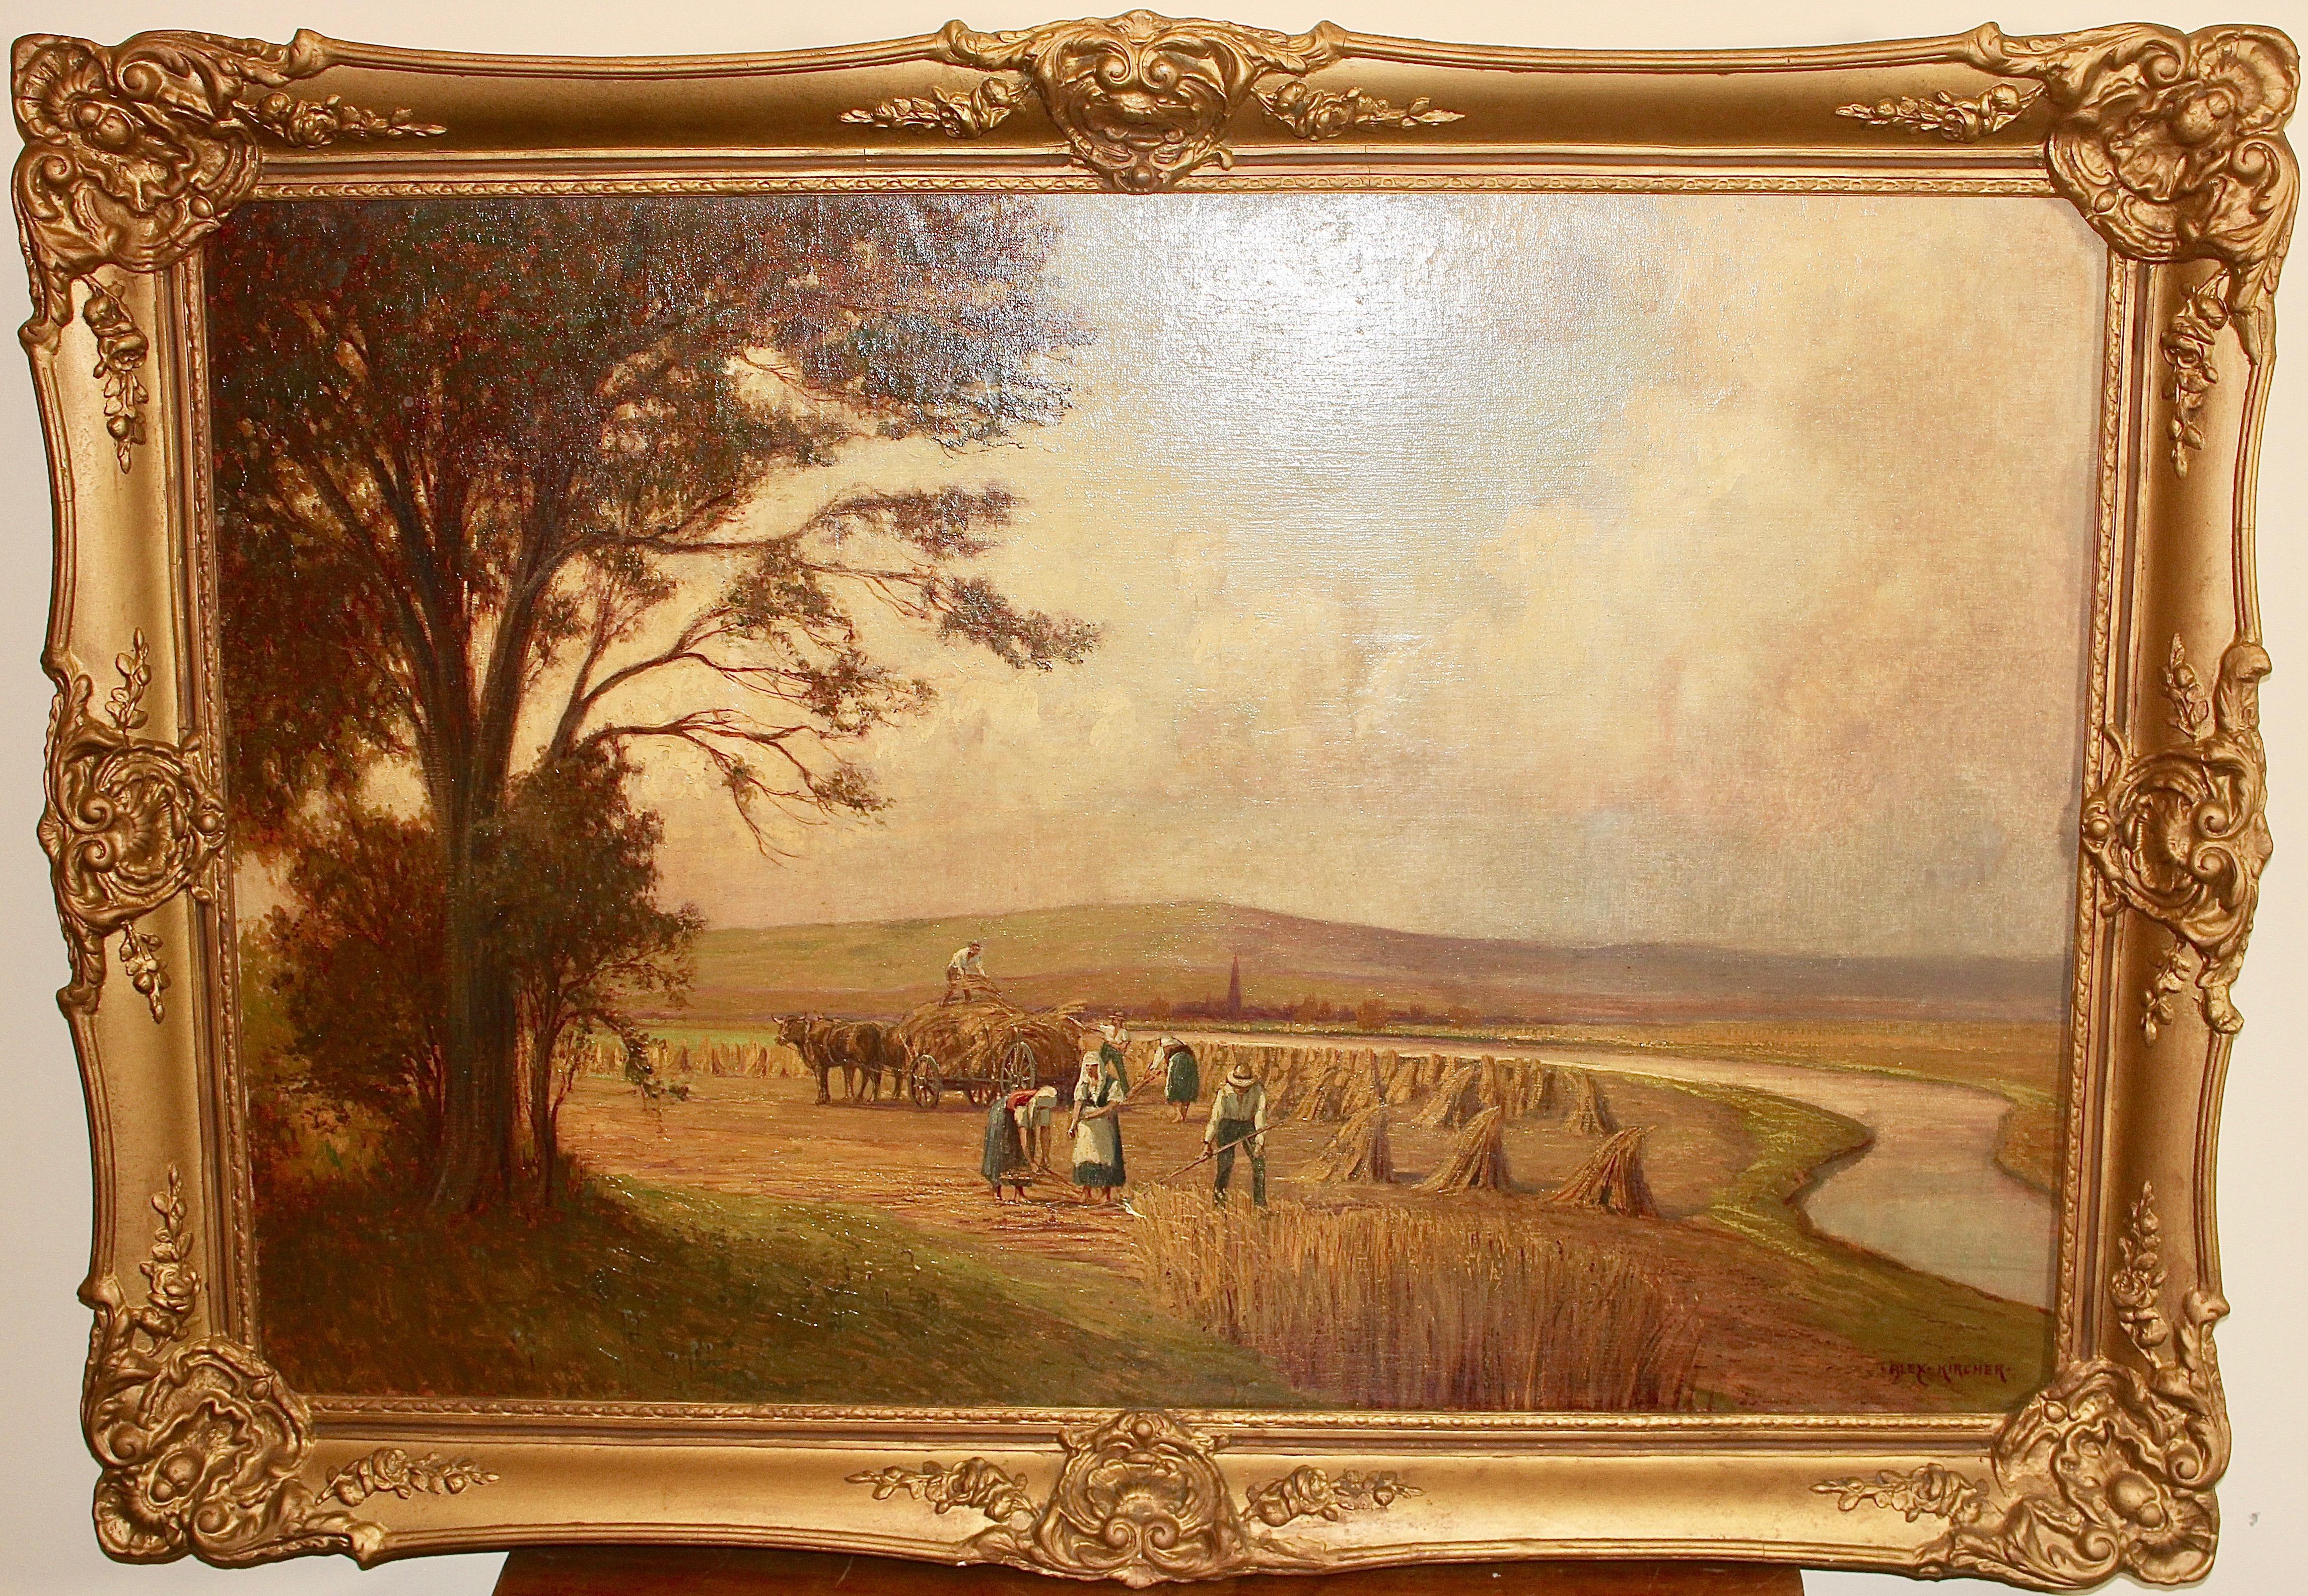 ALEXANDRE KIRCHER Landscape Painting - Antique painting, 19th century, oil on canvas, harvest by the river.